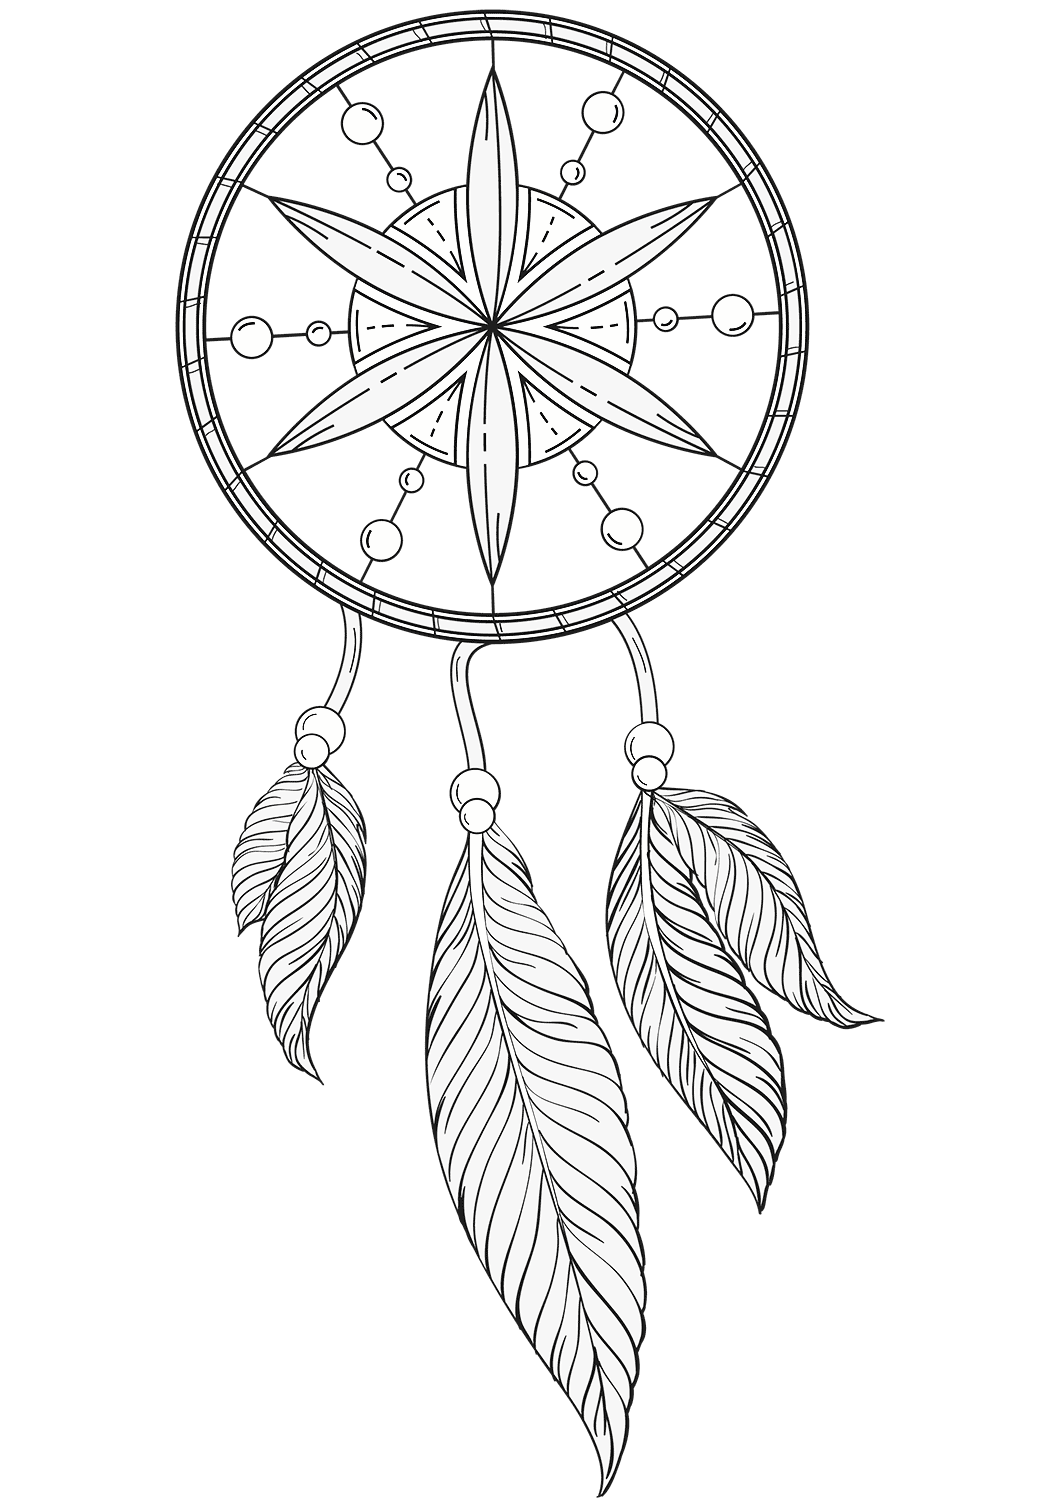 Dream Catcher Coloring Pages Free Printable Coloring Pages for Kids